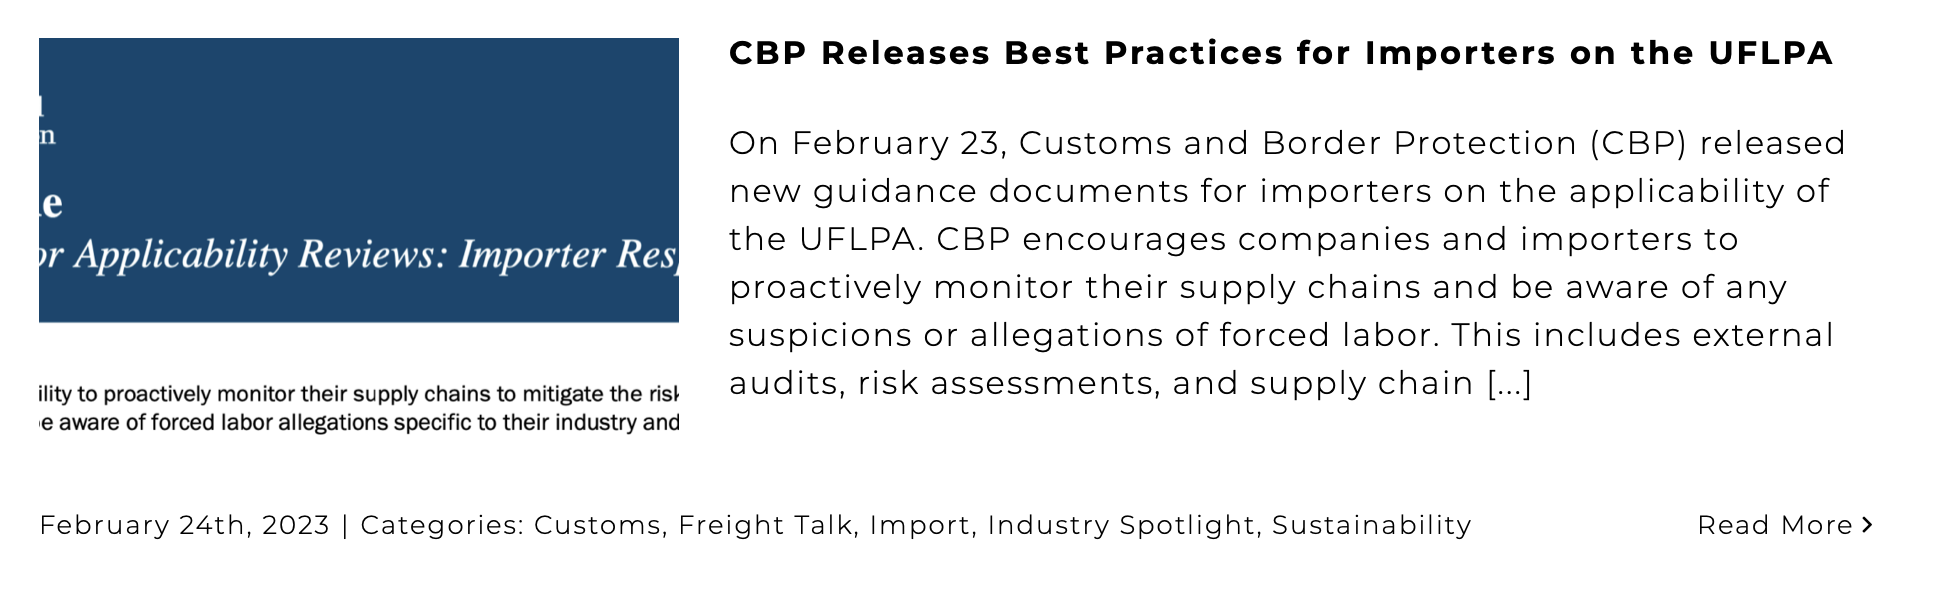 CBP Releases Best Practices for Importers on the UFLPA